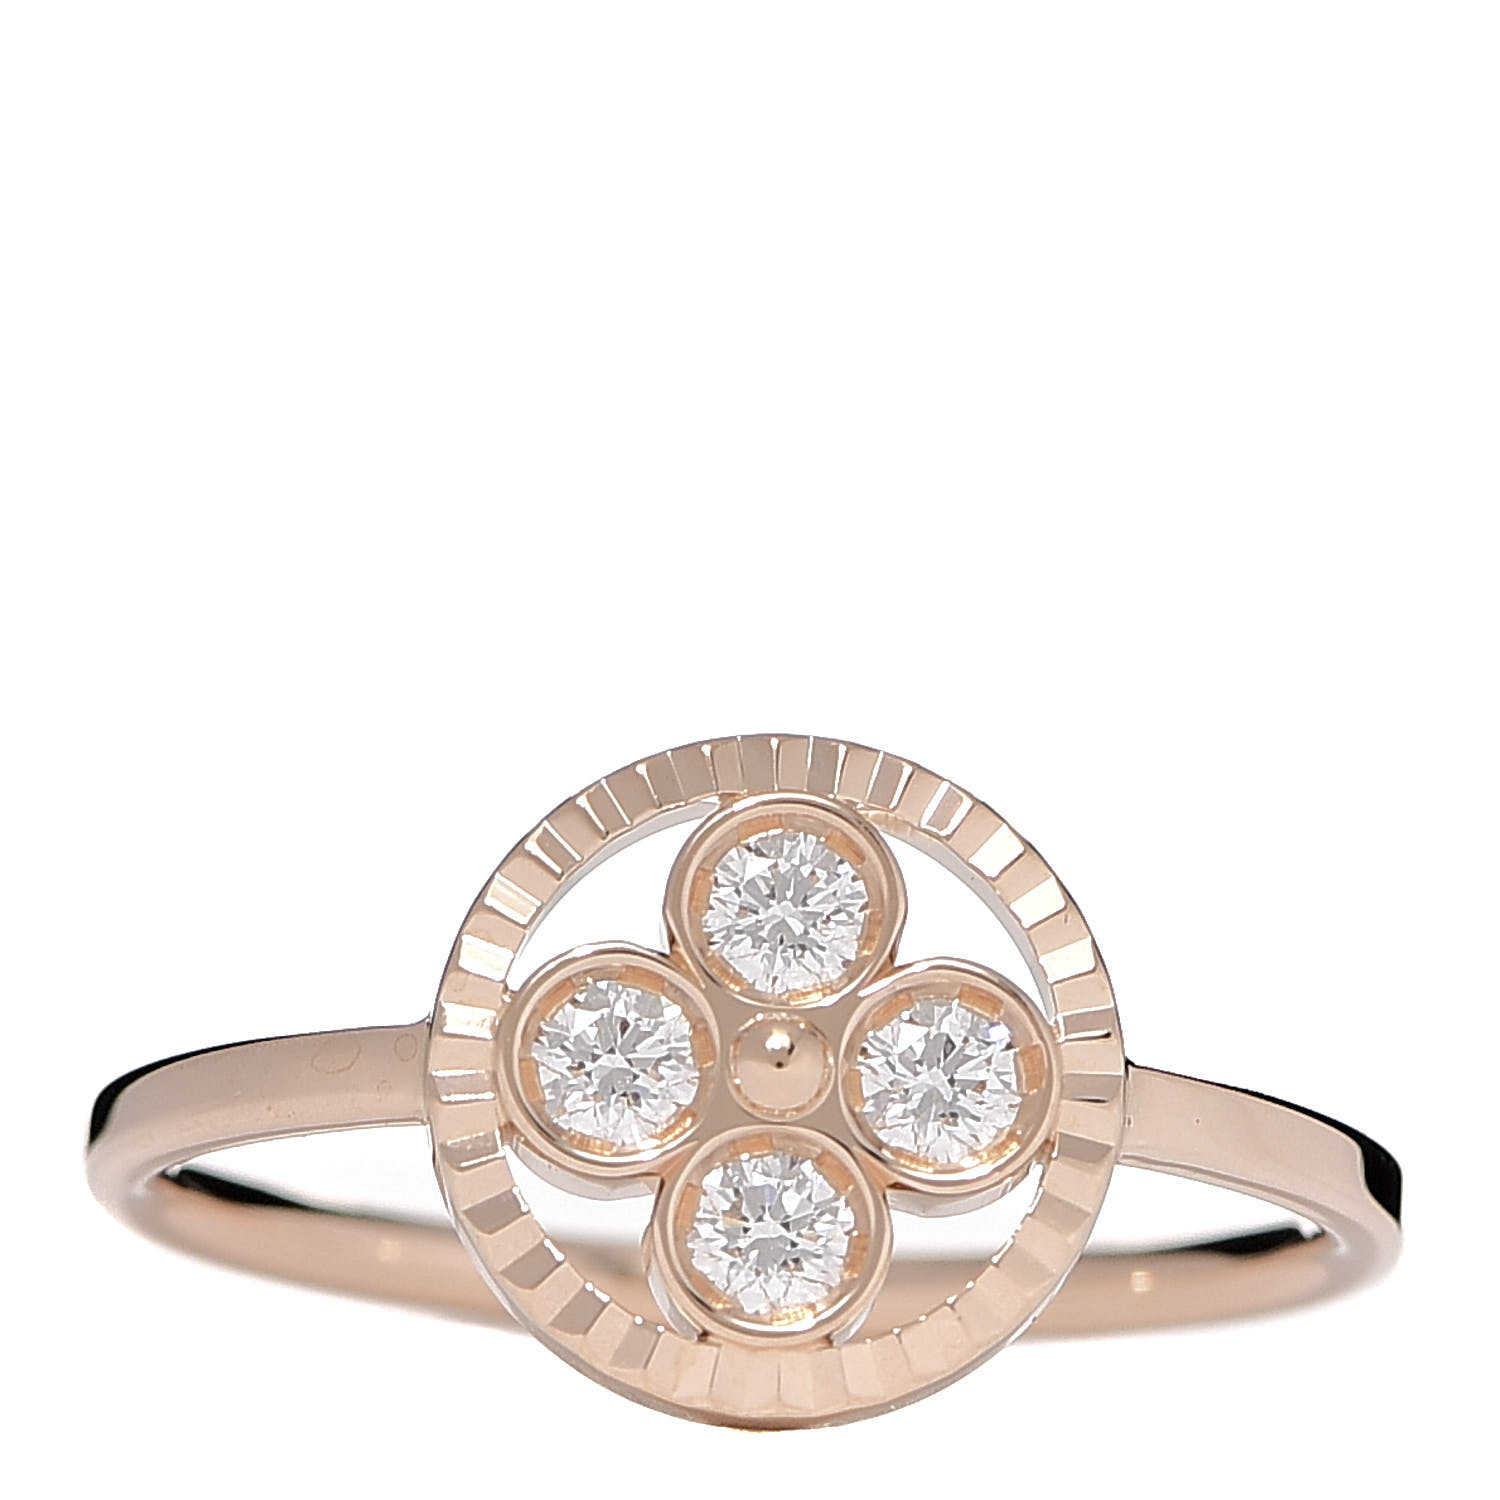 LOUIS VUITTON 18K Pink Gold Blossom BB Ring 4.75 | FASHIONPHILE